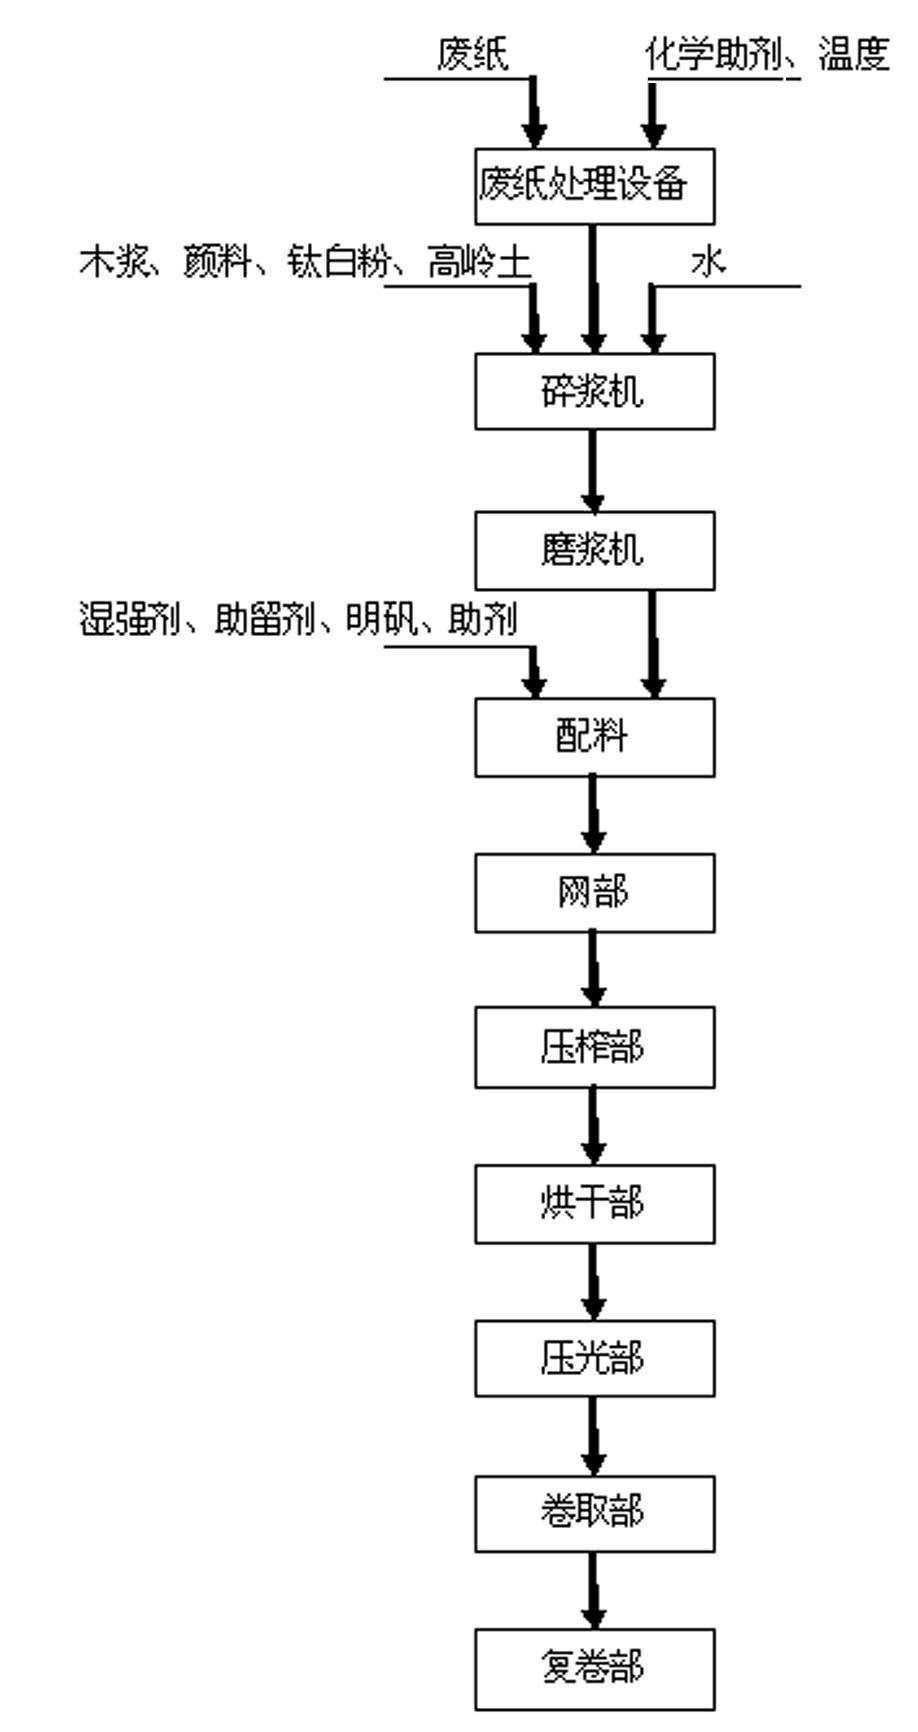 Process for producing printed decorative raw paper by using recycled waste paper